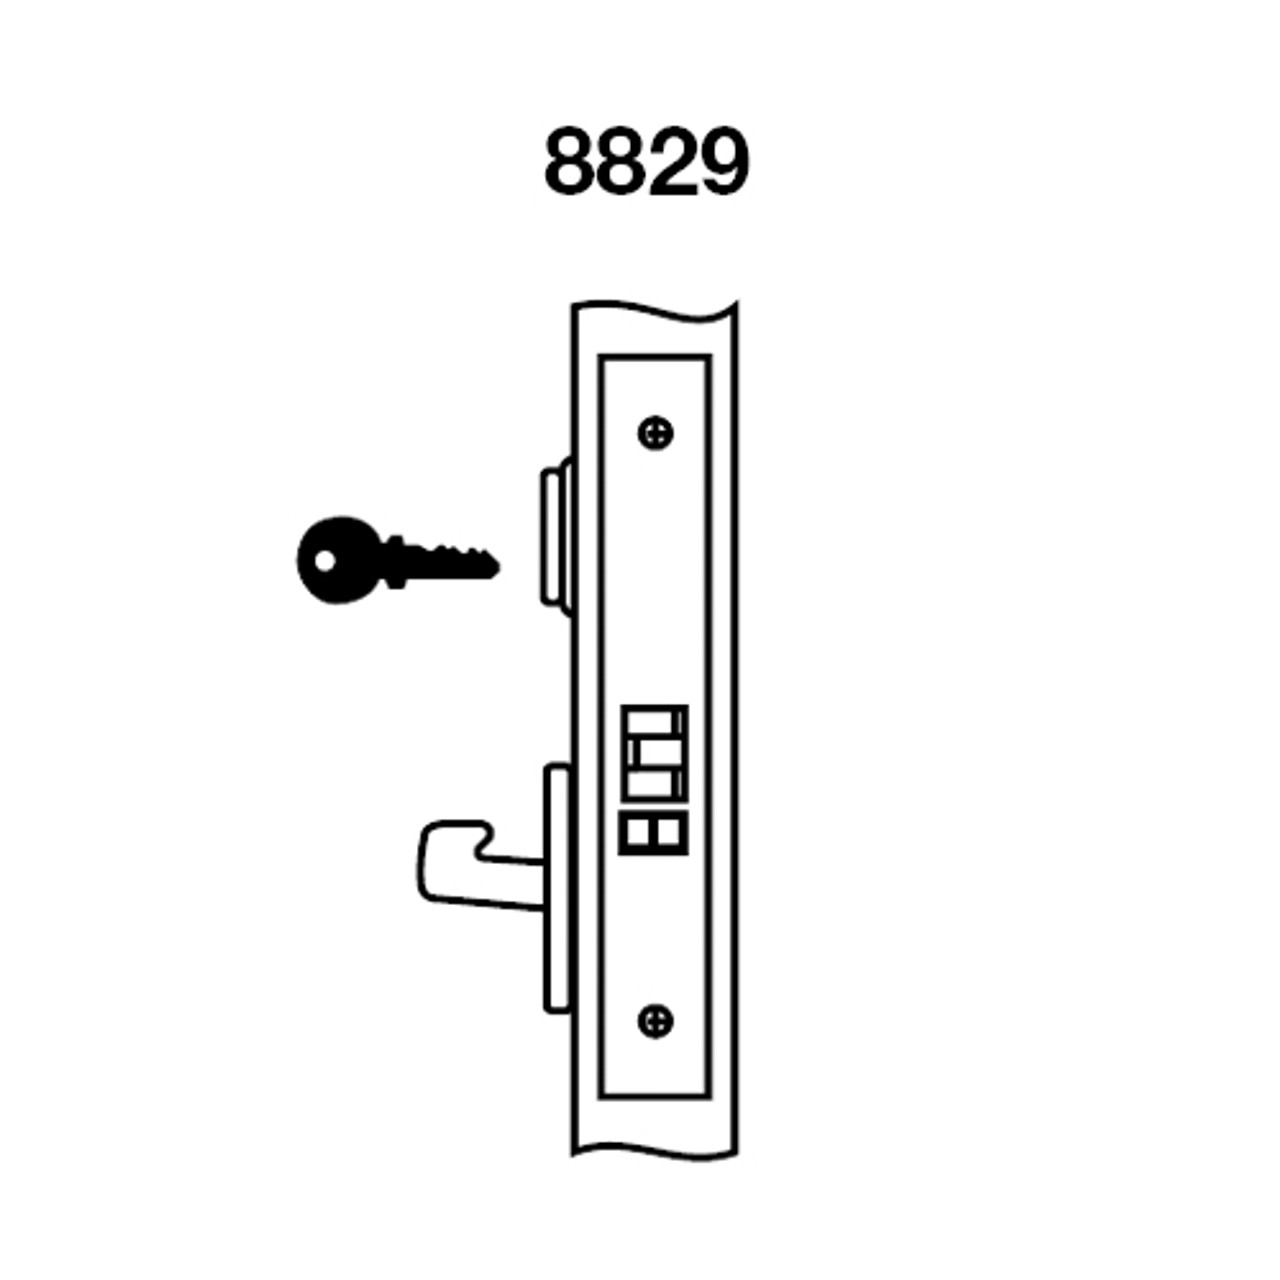 PBR8829FL-626 Yale 8800FL Series Single Cylinder Mortise Closet Locks with Pacific Beach Lever in Satin Chrome